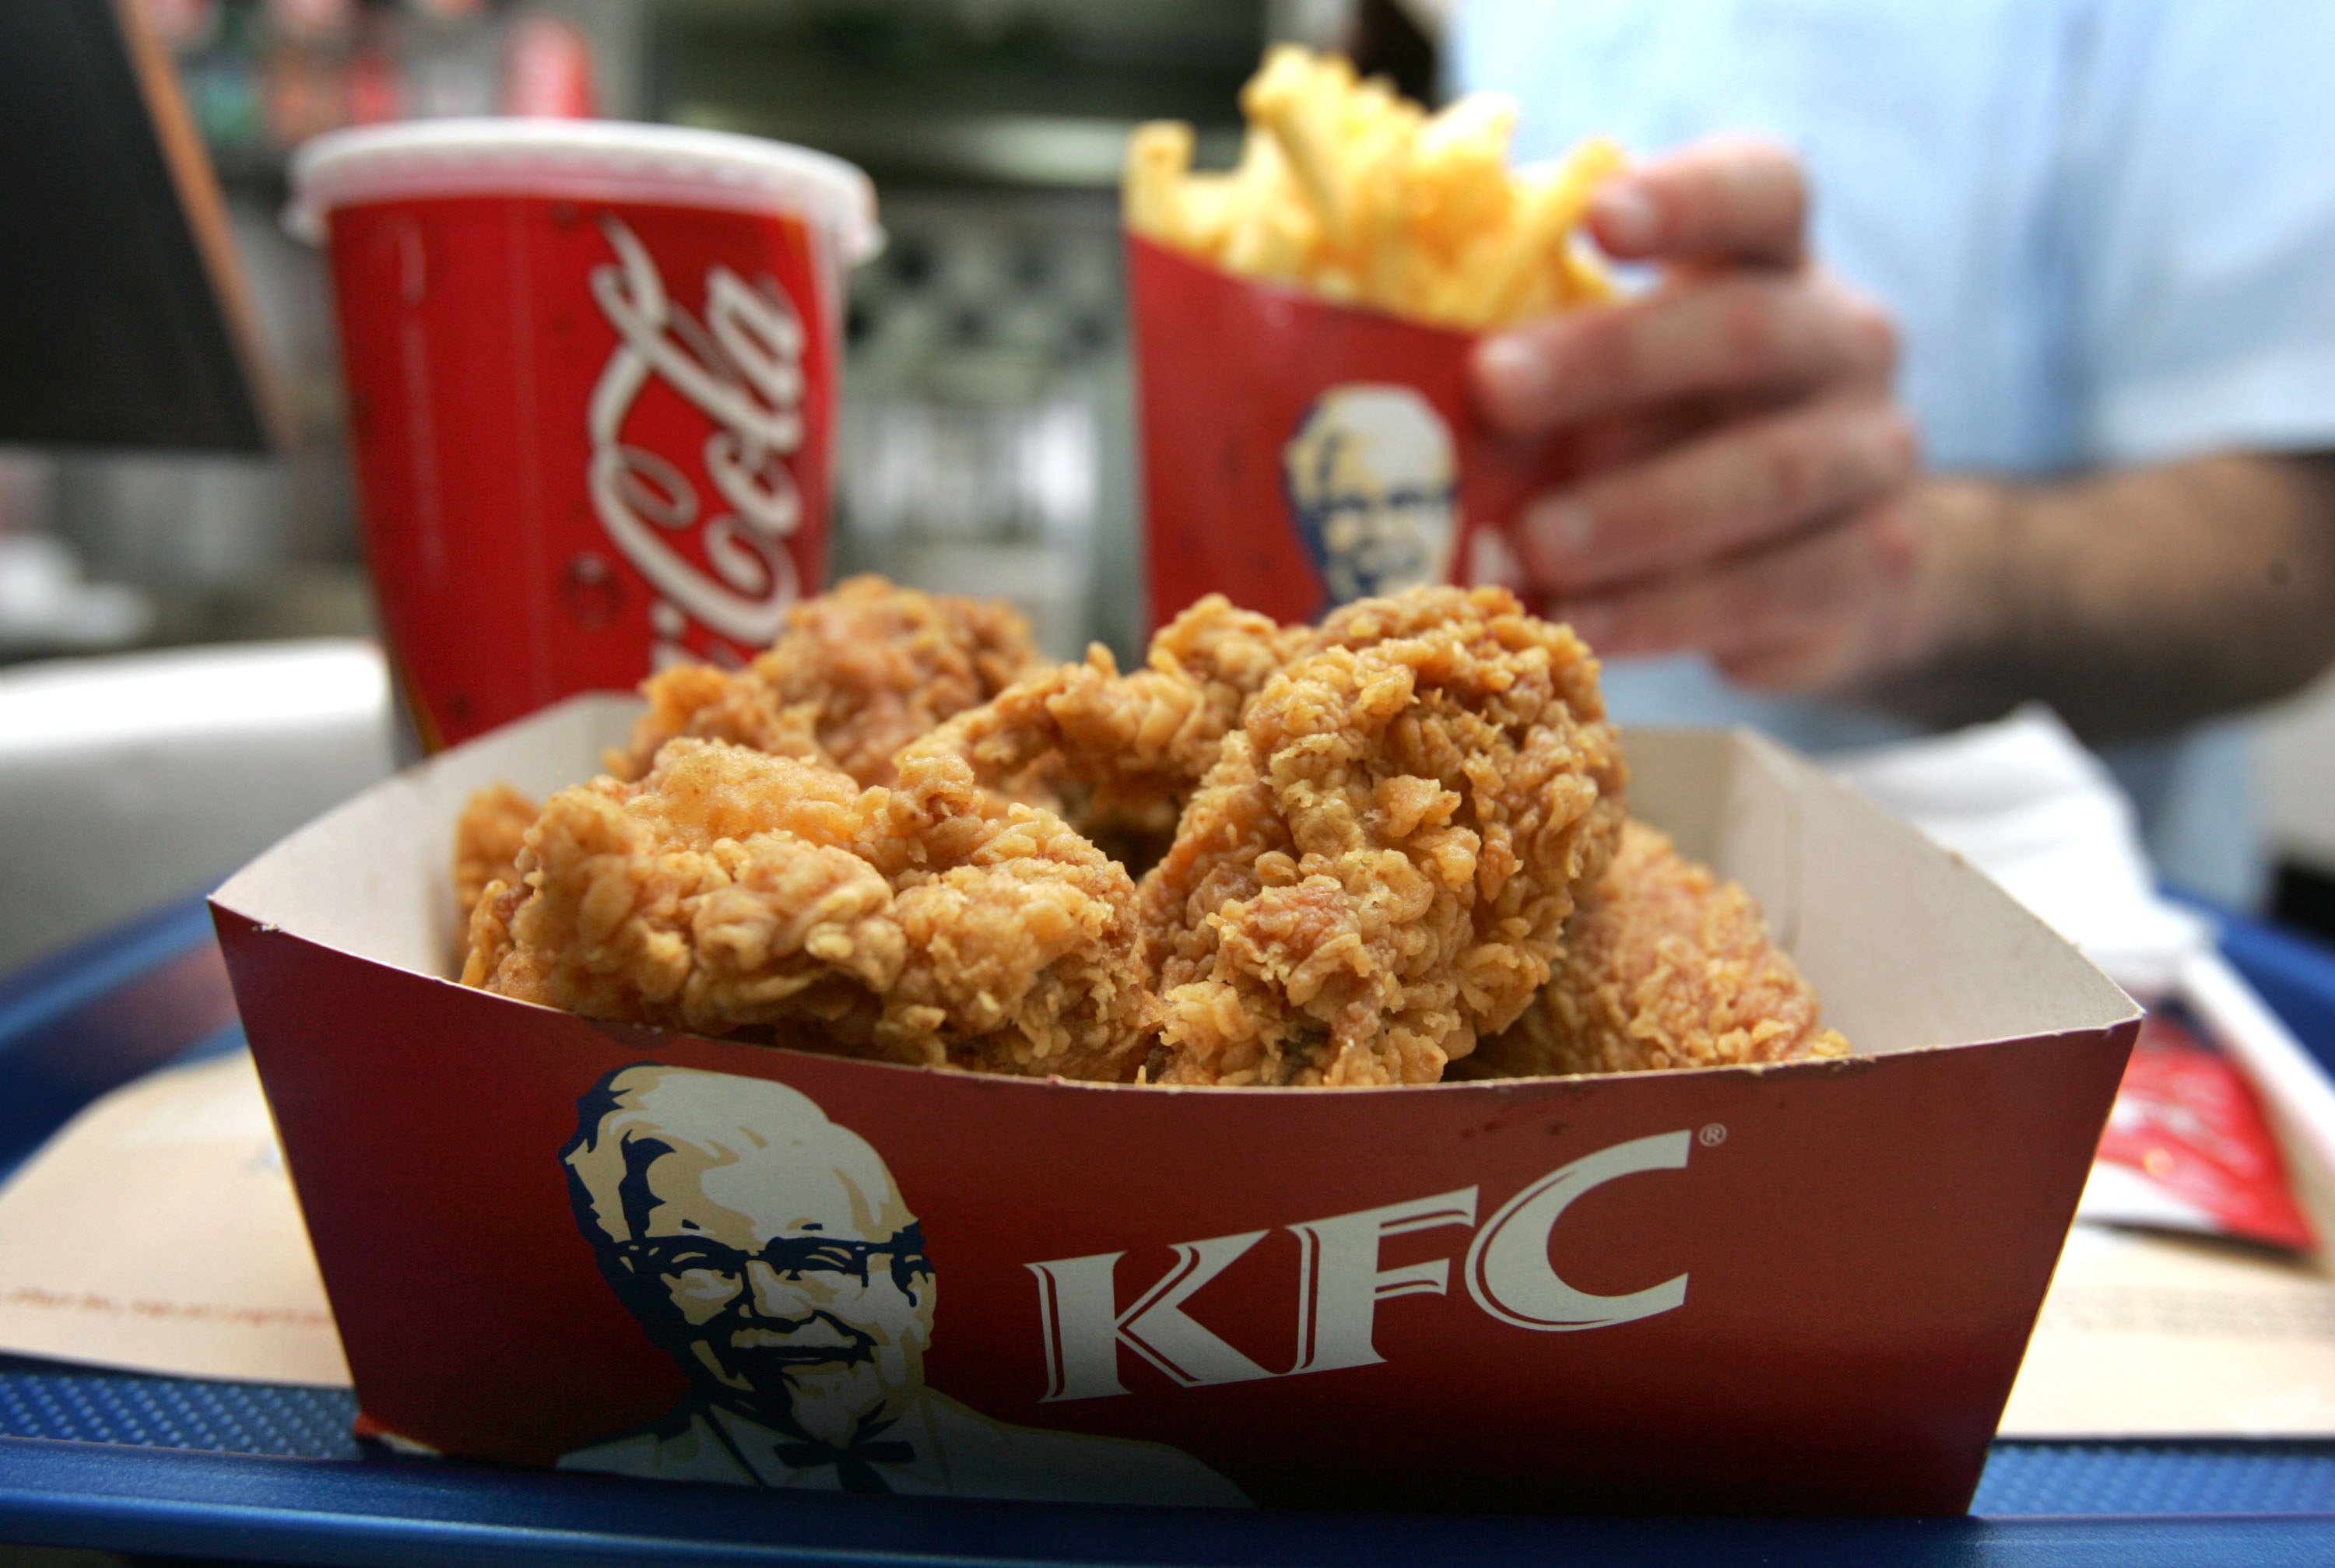 Woman Claims Maggot-infested Kfc Chicken Sent Her Son , HD Wallpaper & Backgrounds